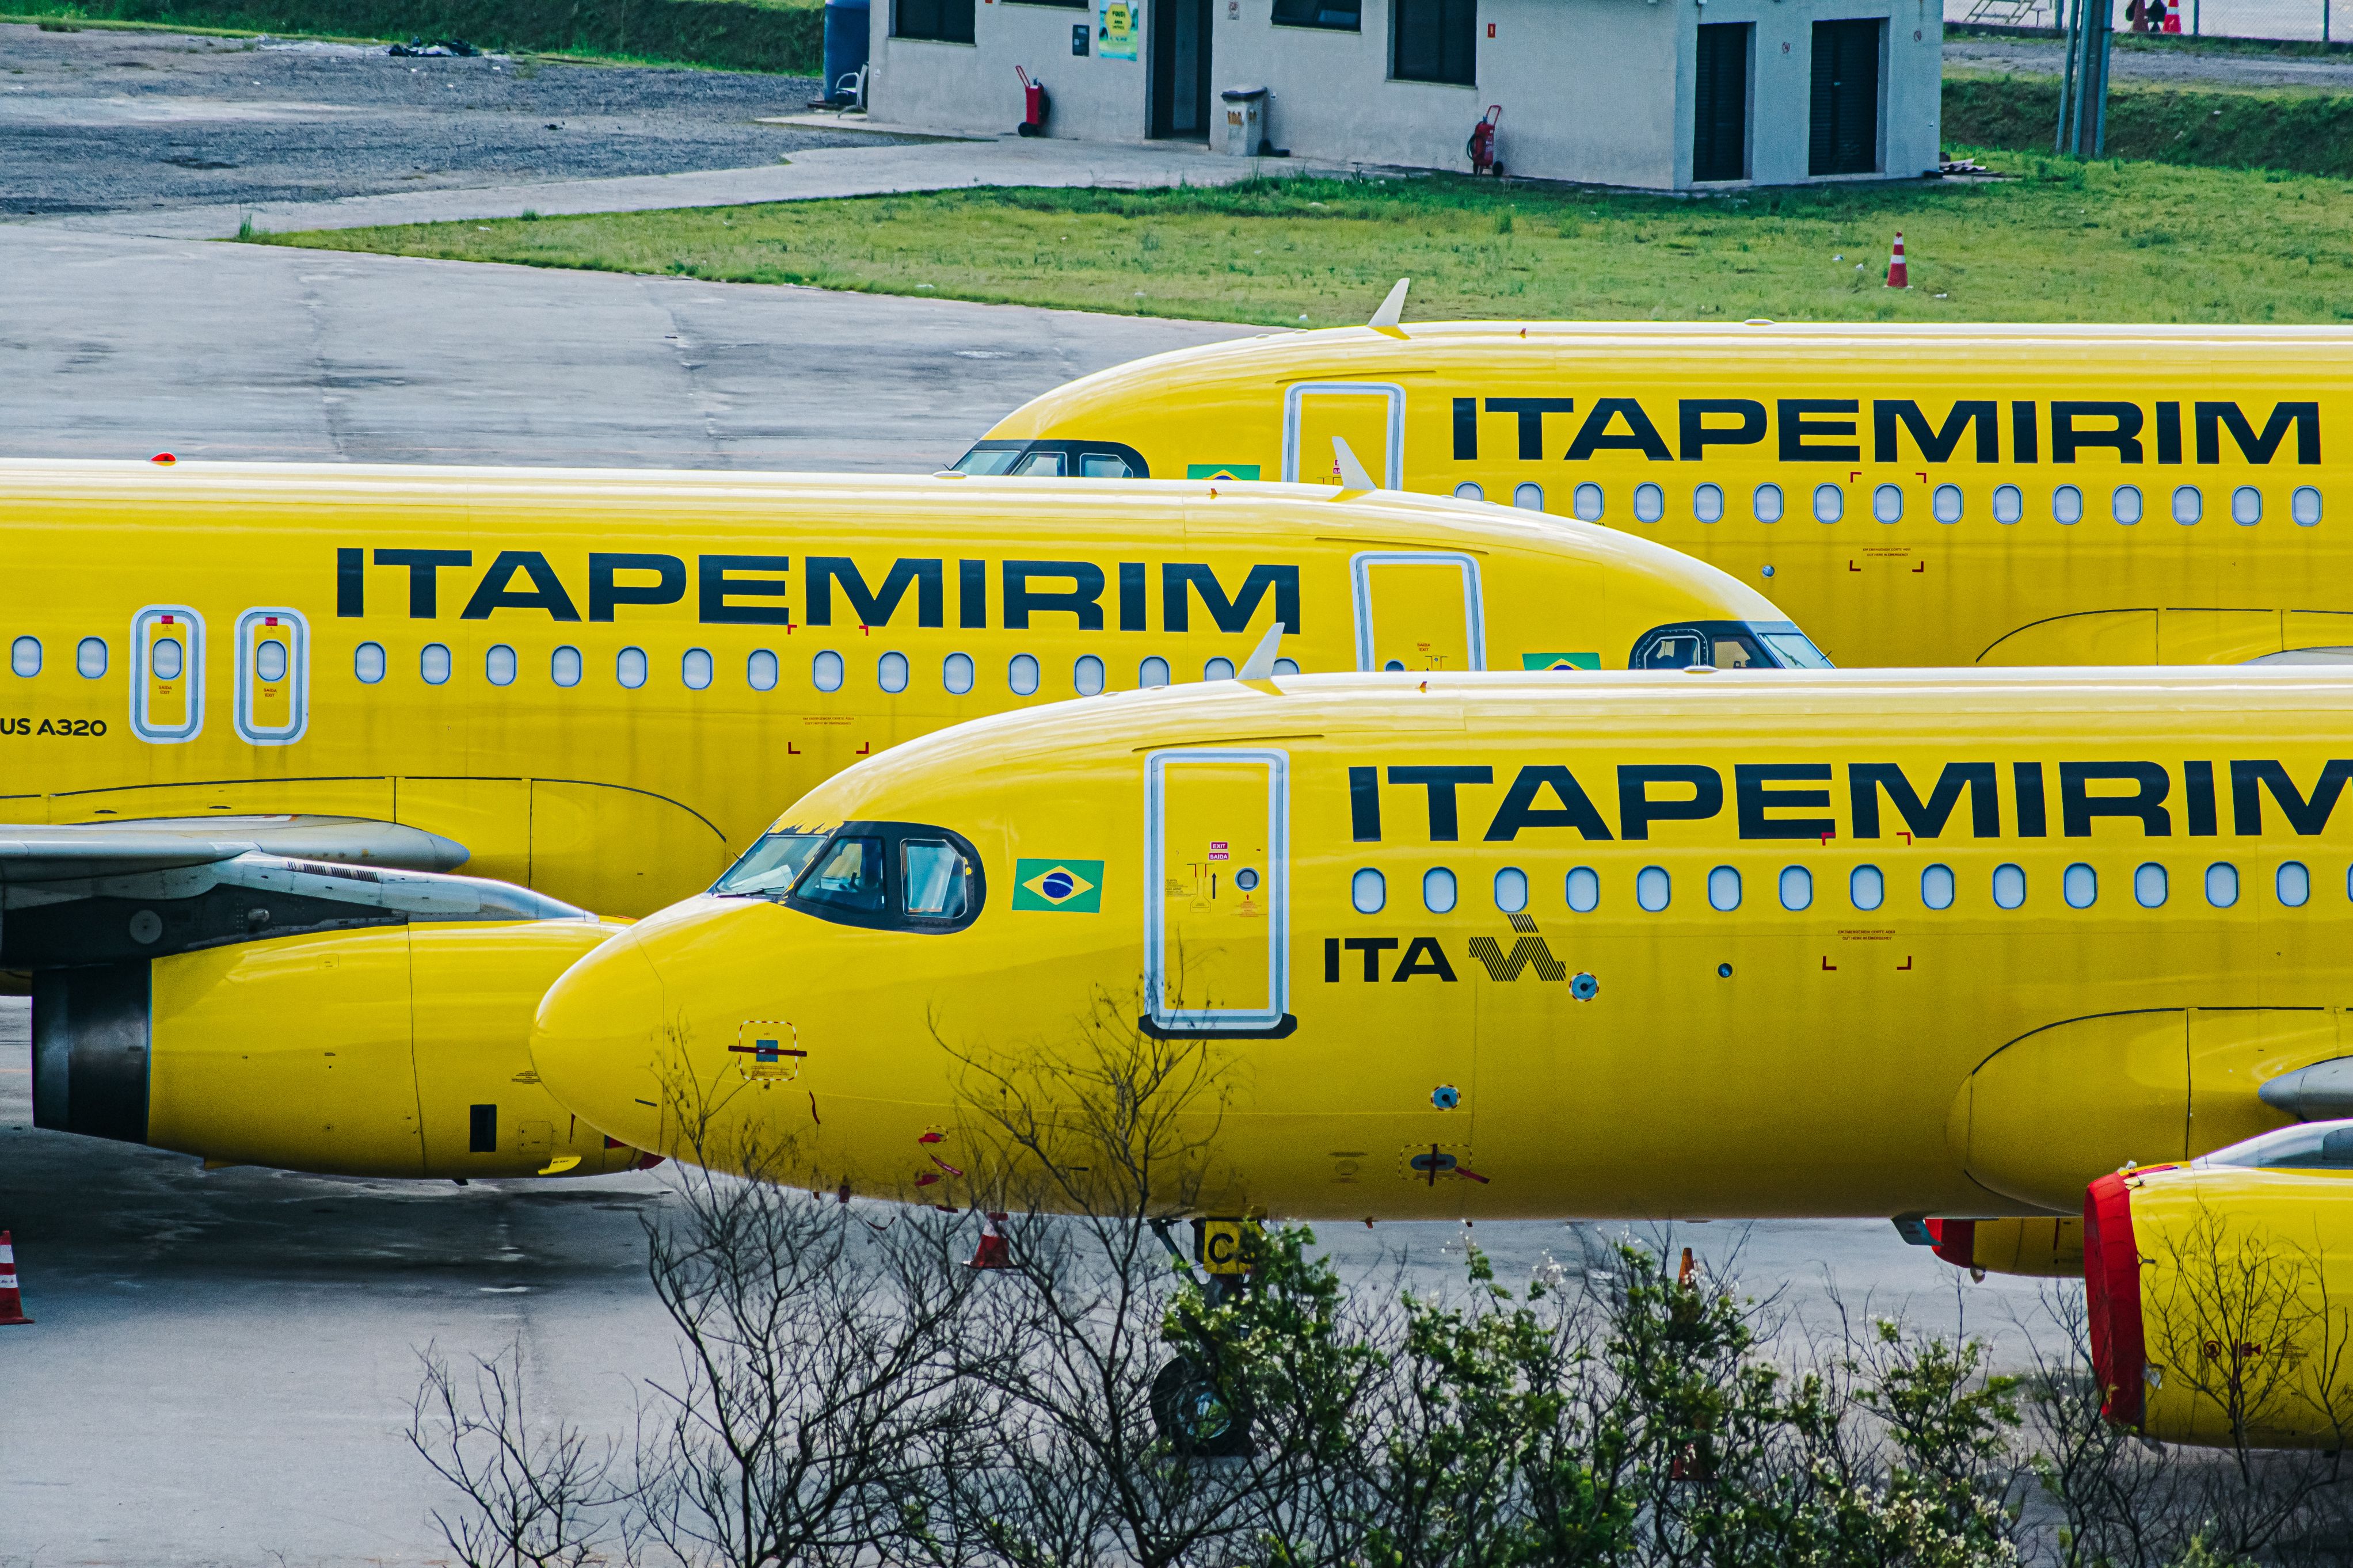 Several aircraft of Itapemirim Transportes Aéreos